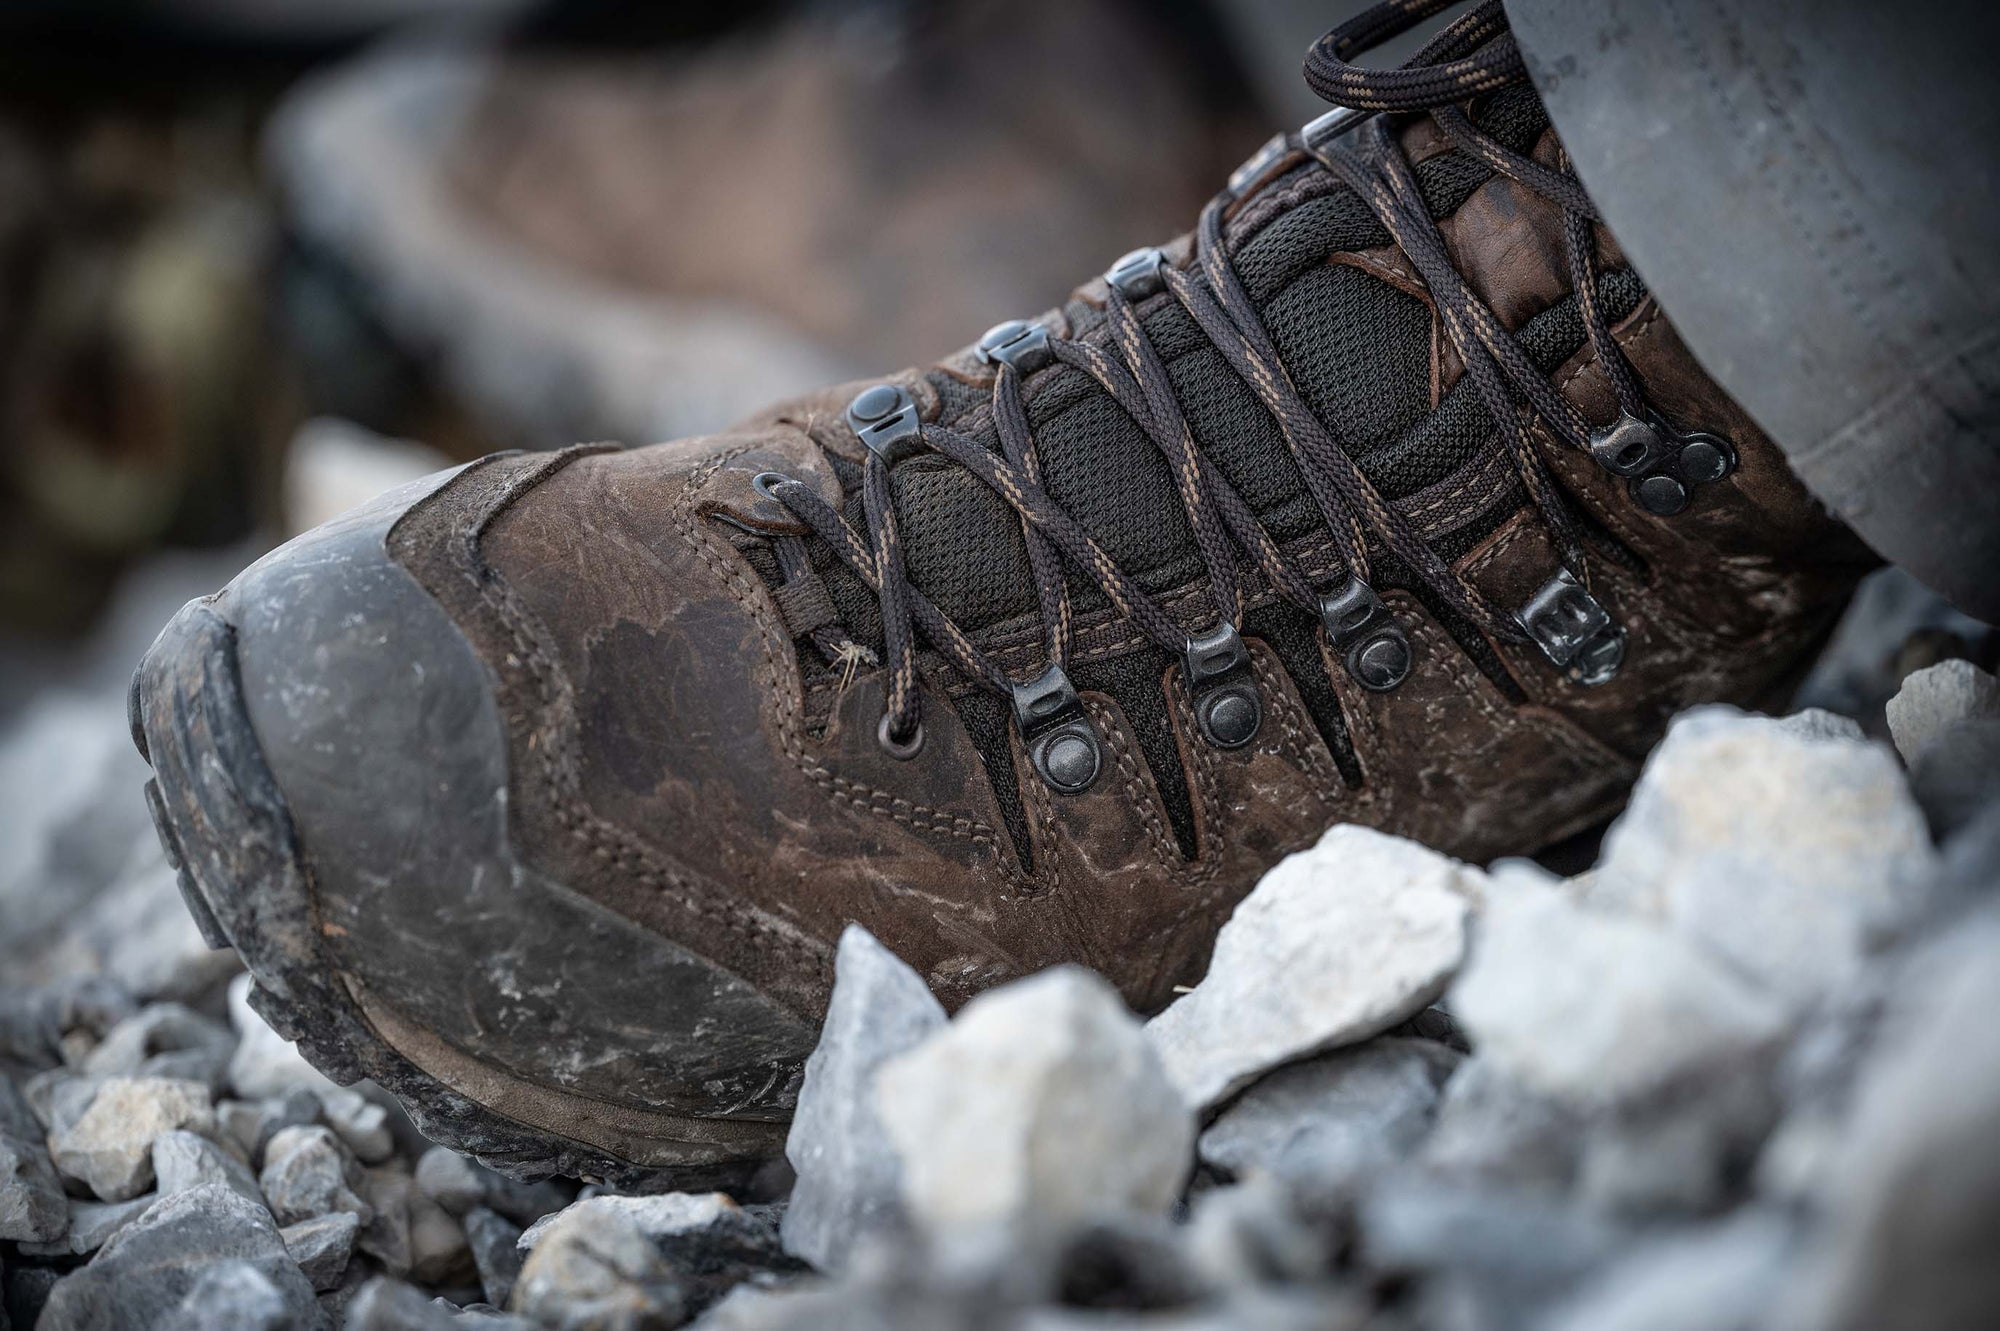 Eurolight Hunting and Hiking Boots